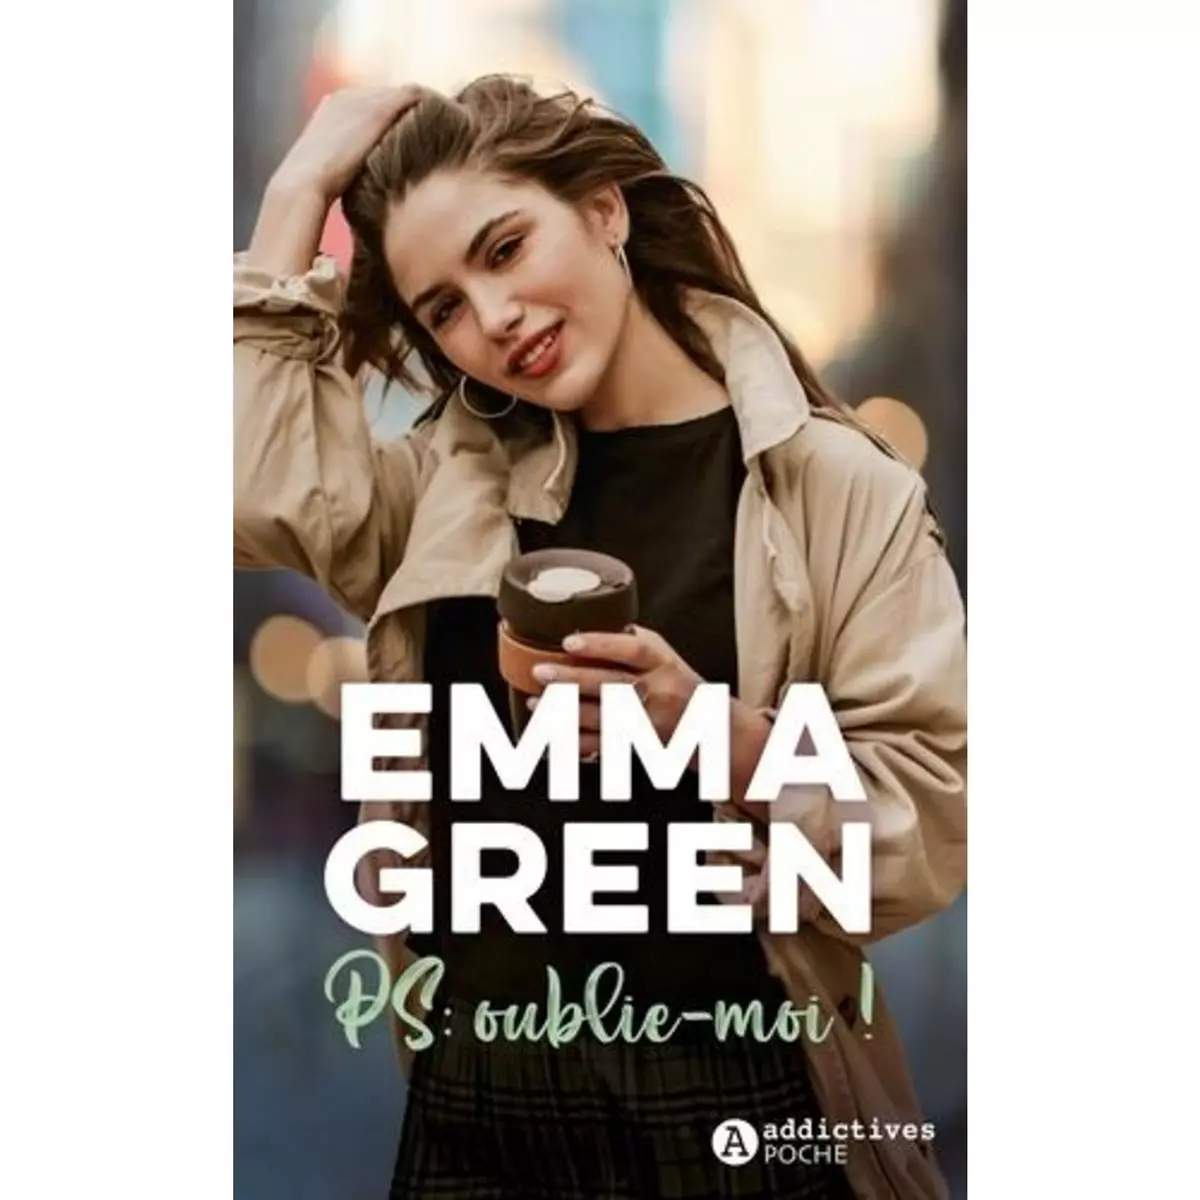  PS : OUBLIE-MOI !, Green Emma